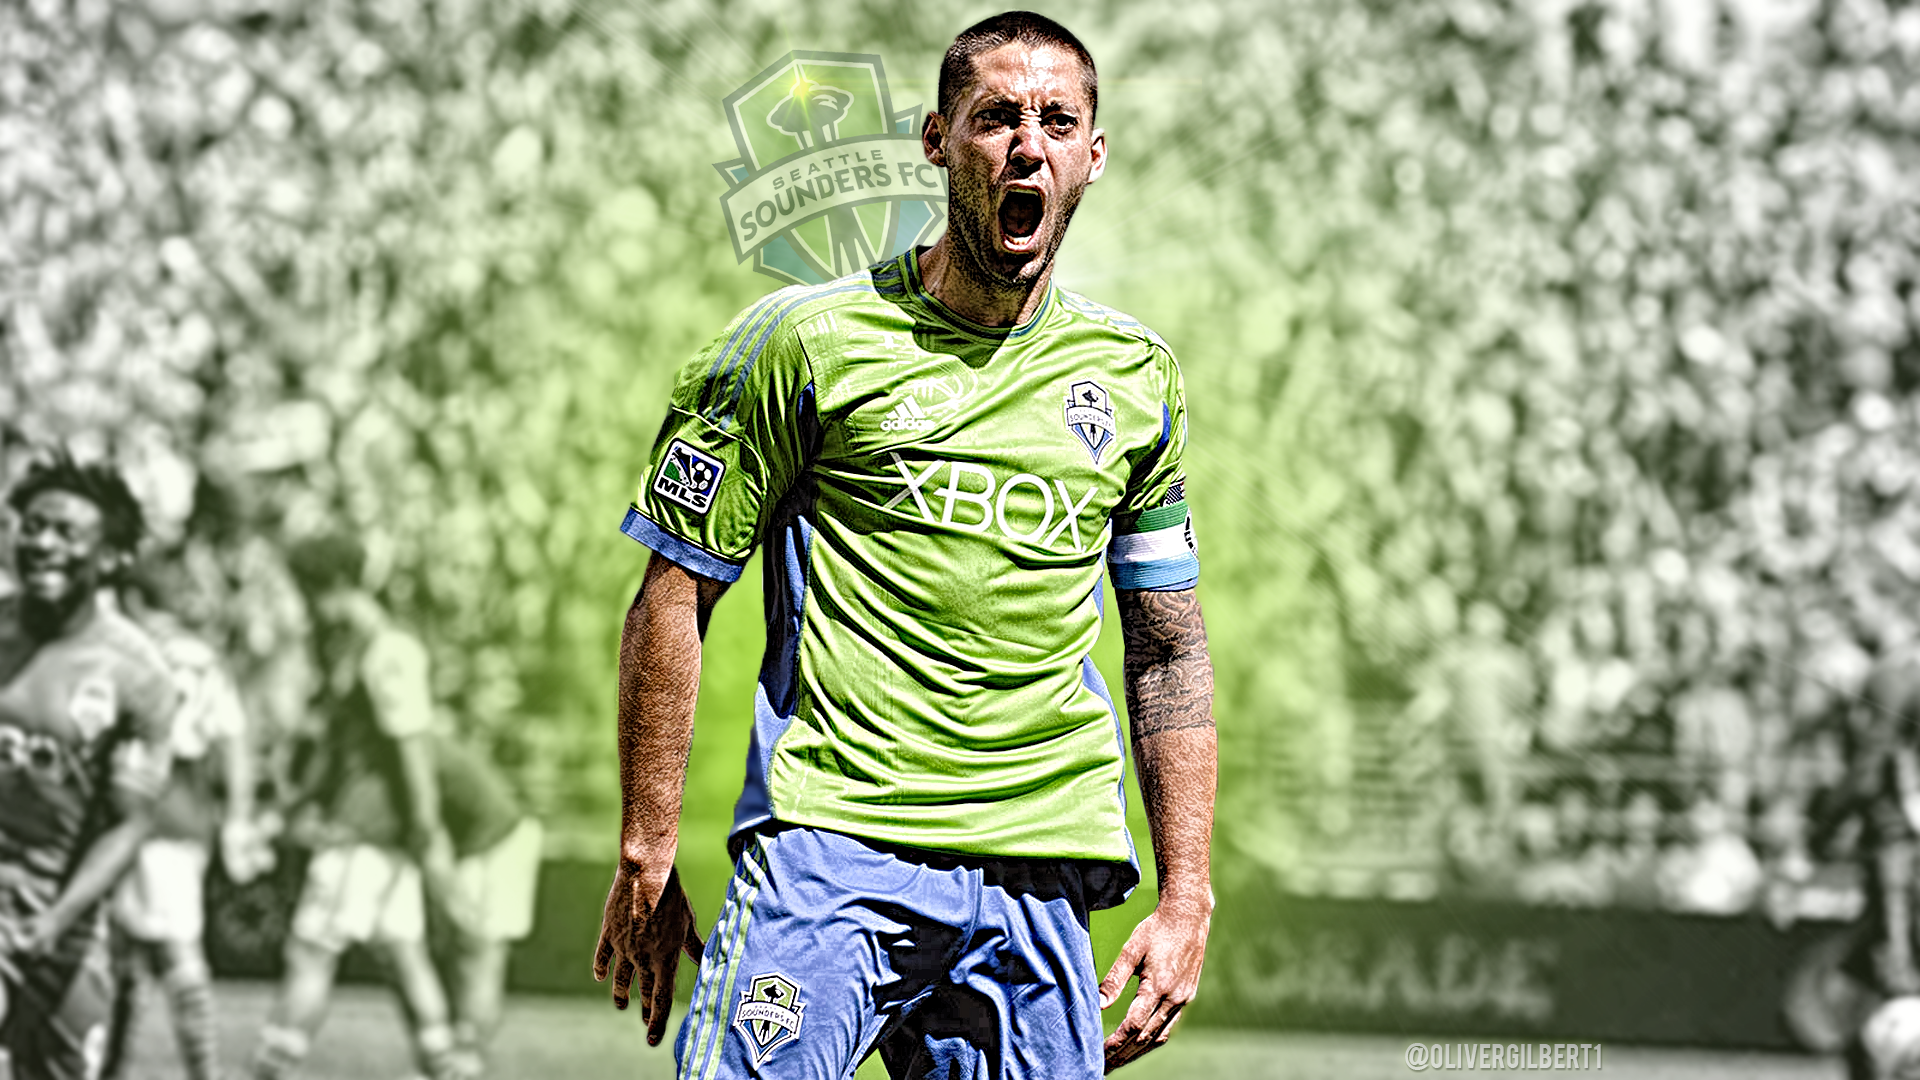 Sounders Iphone Wallpaper images